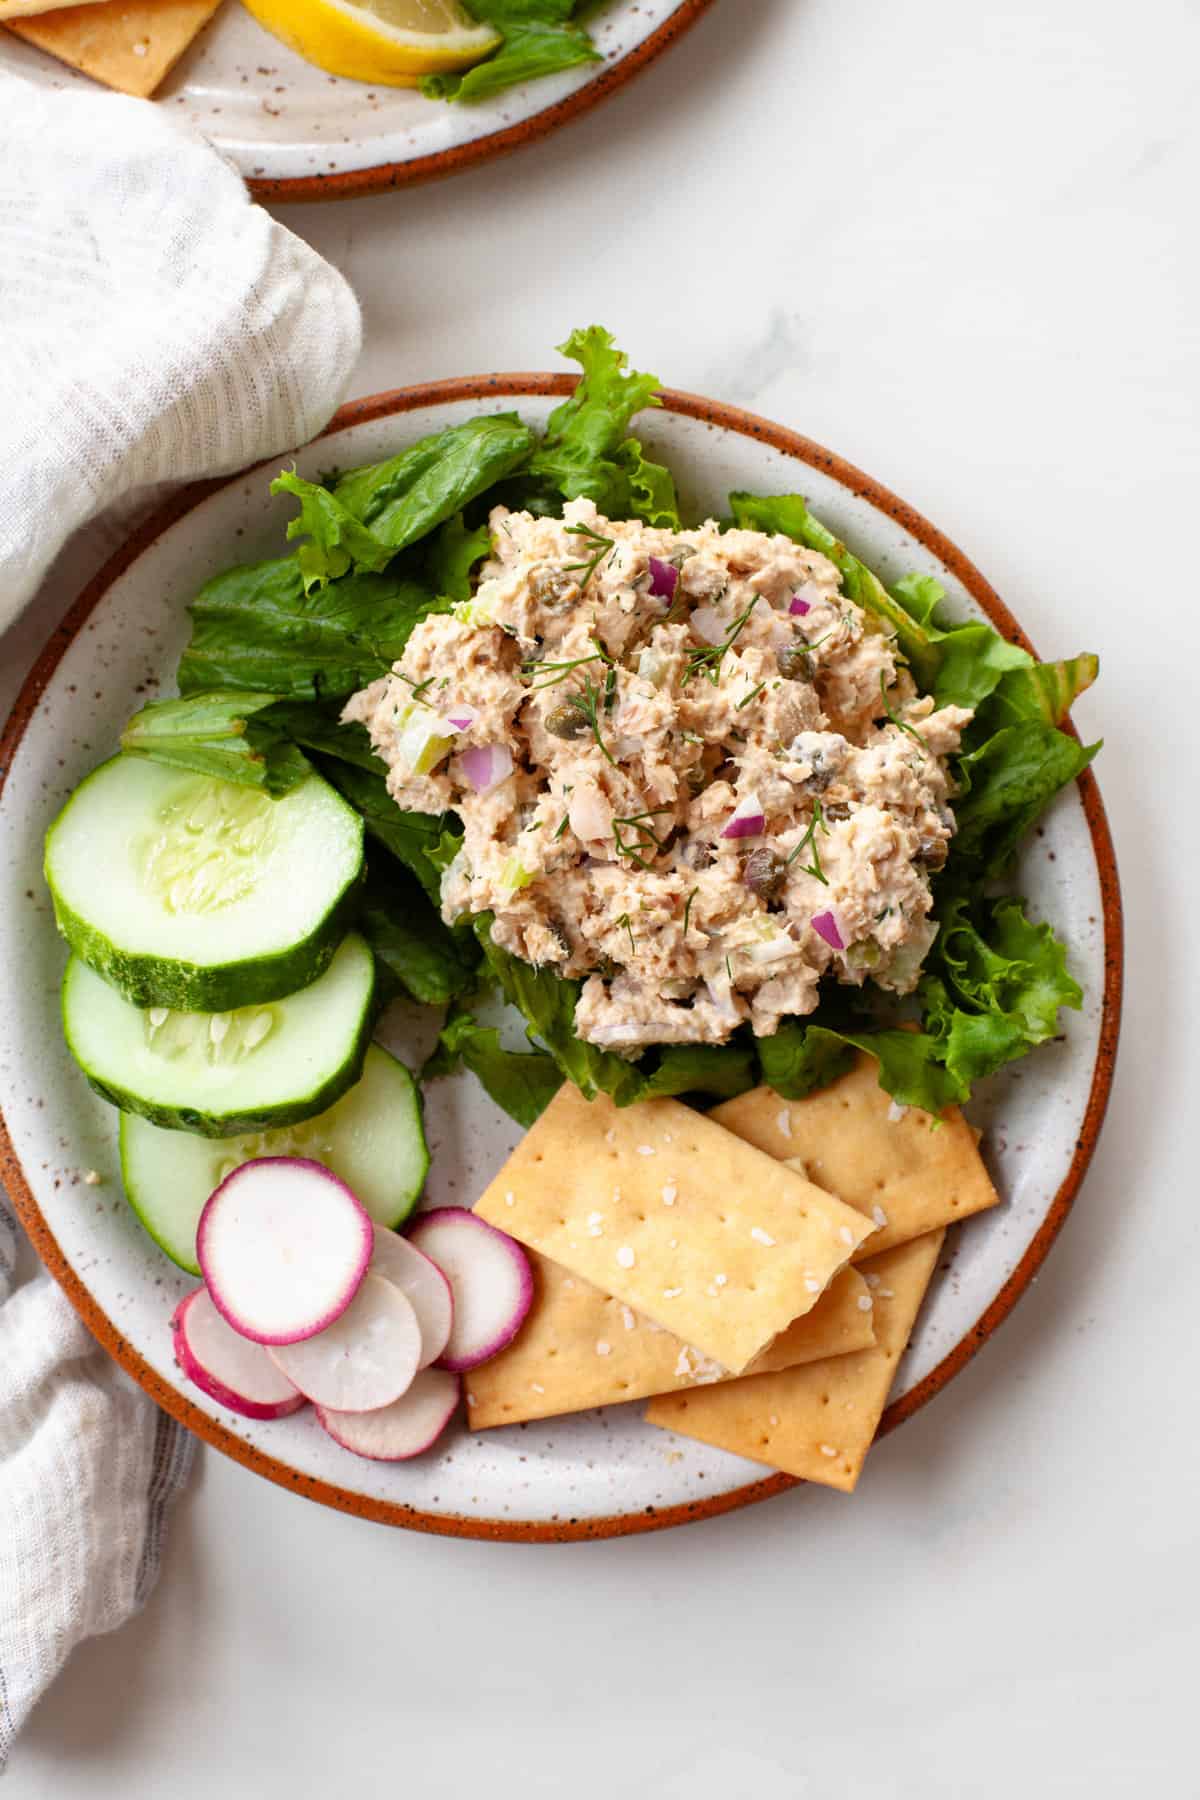 canned salmon salad on a bed of lettuce with cucumbers, radishes and crackers on a speckled plate